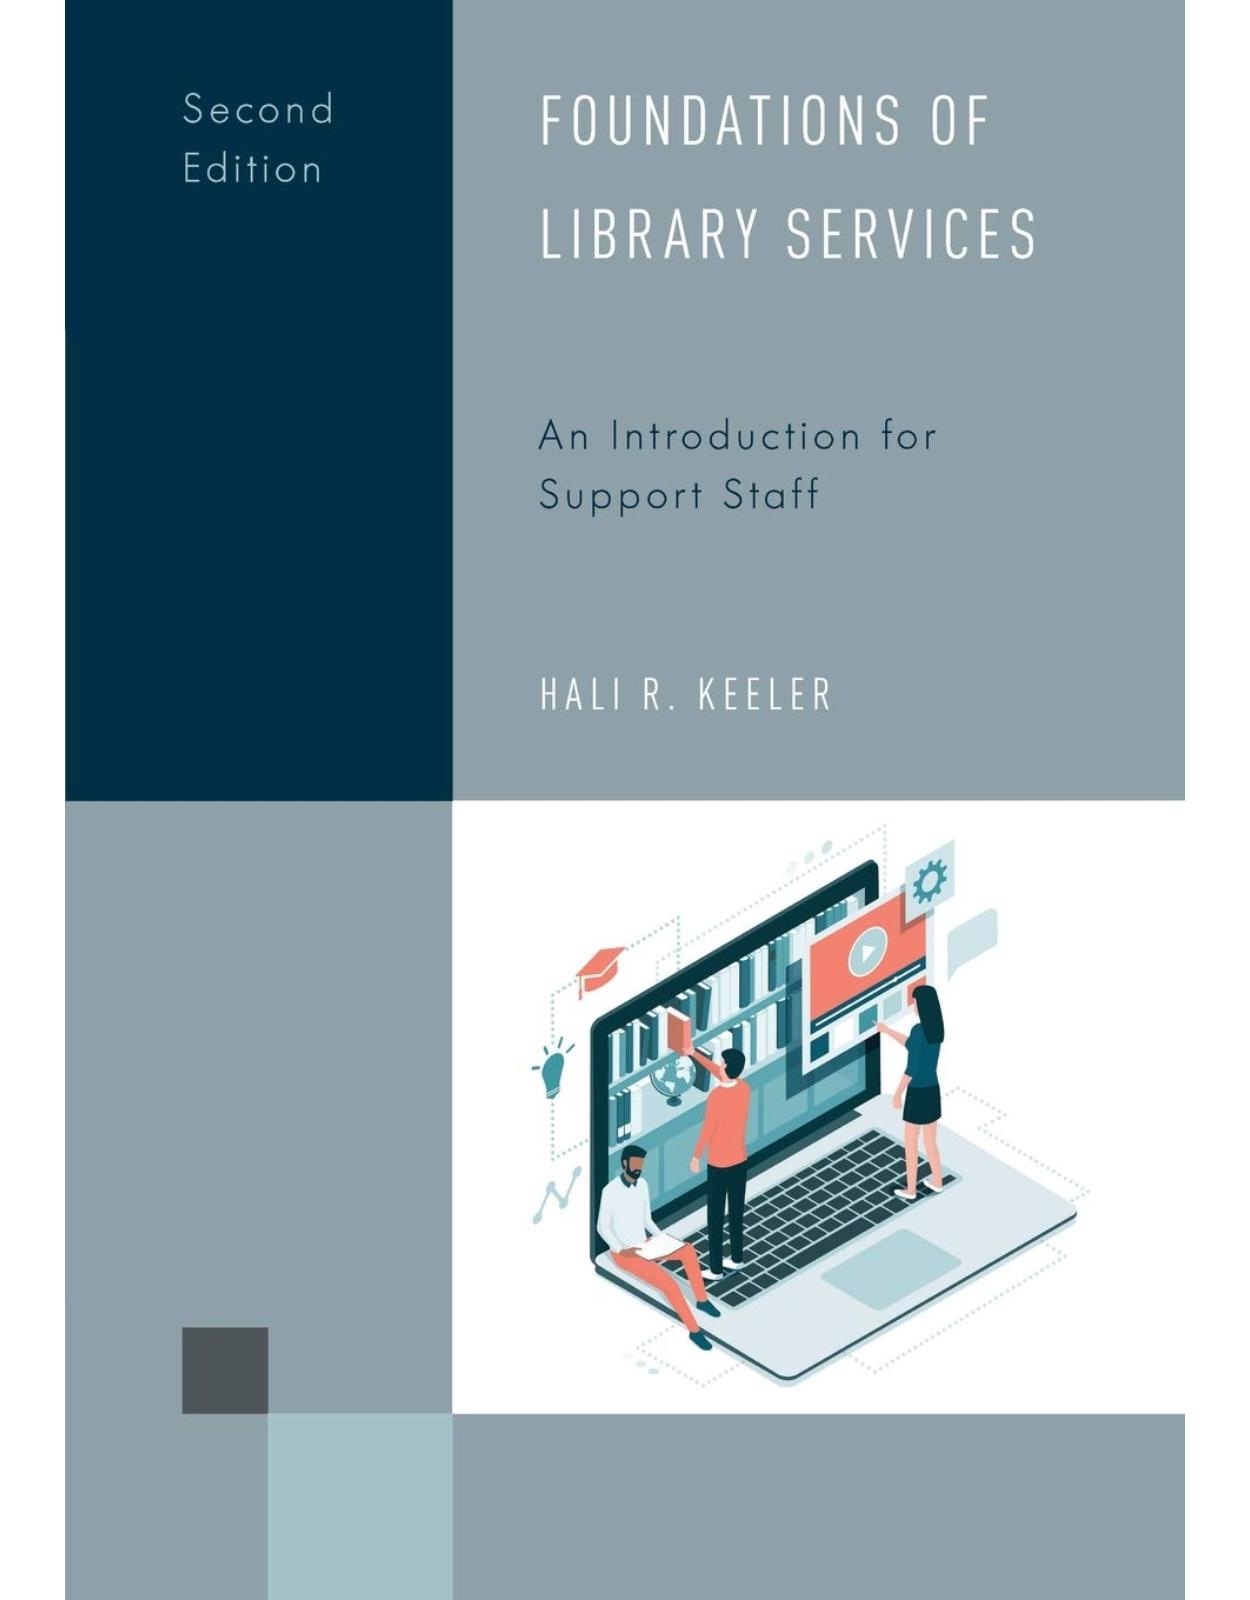 Foundations of Library Services: An Introduction for Support Staff, Second Edition: 7 